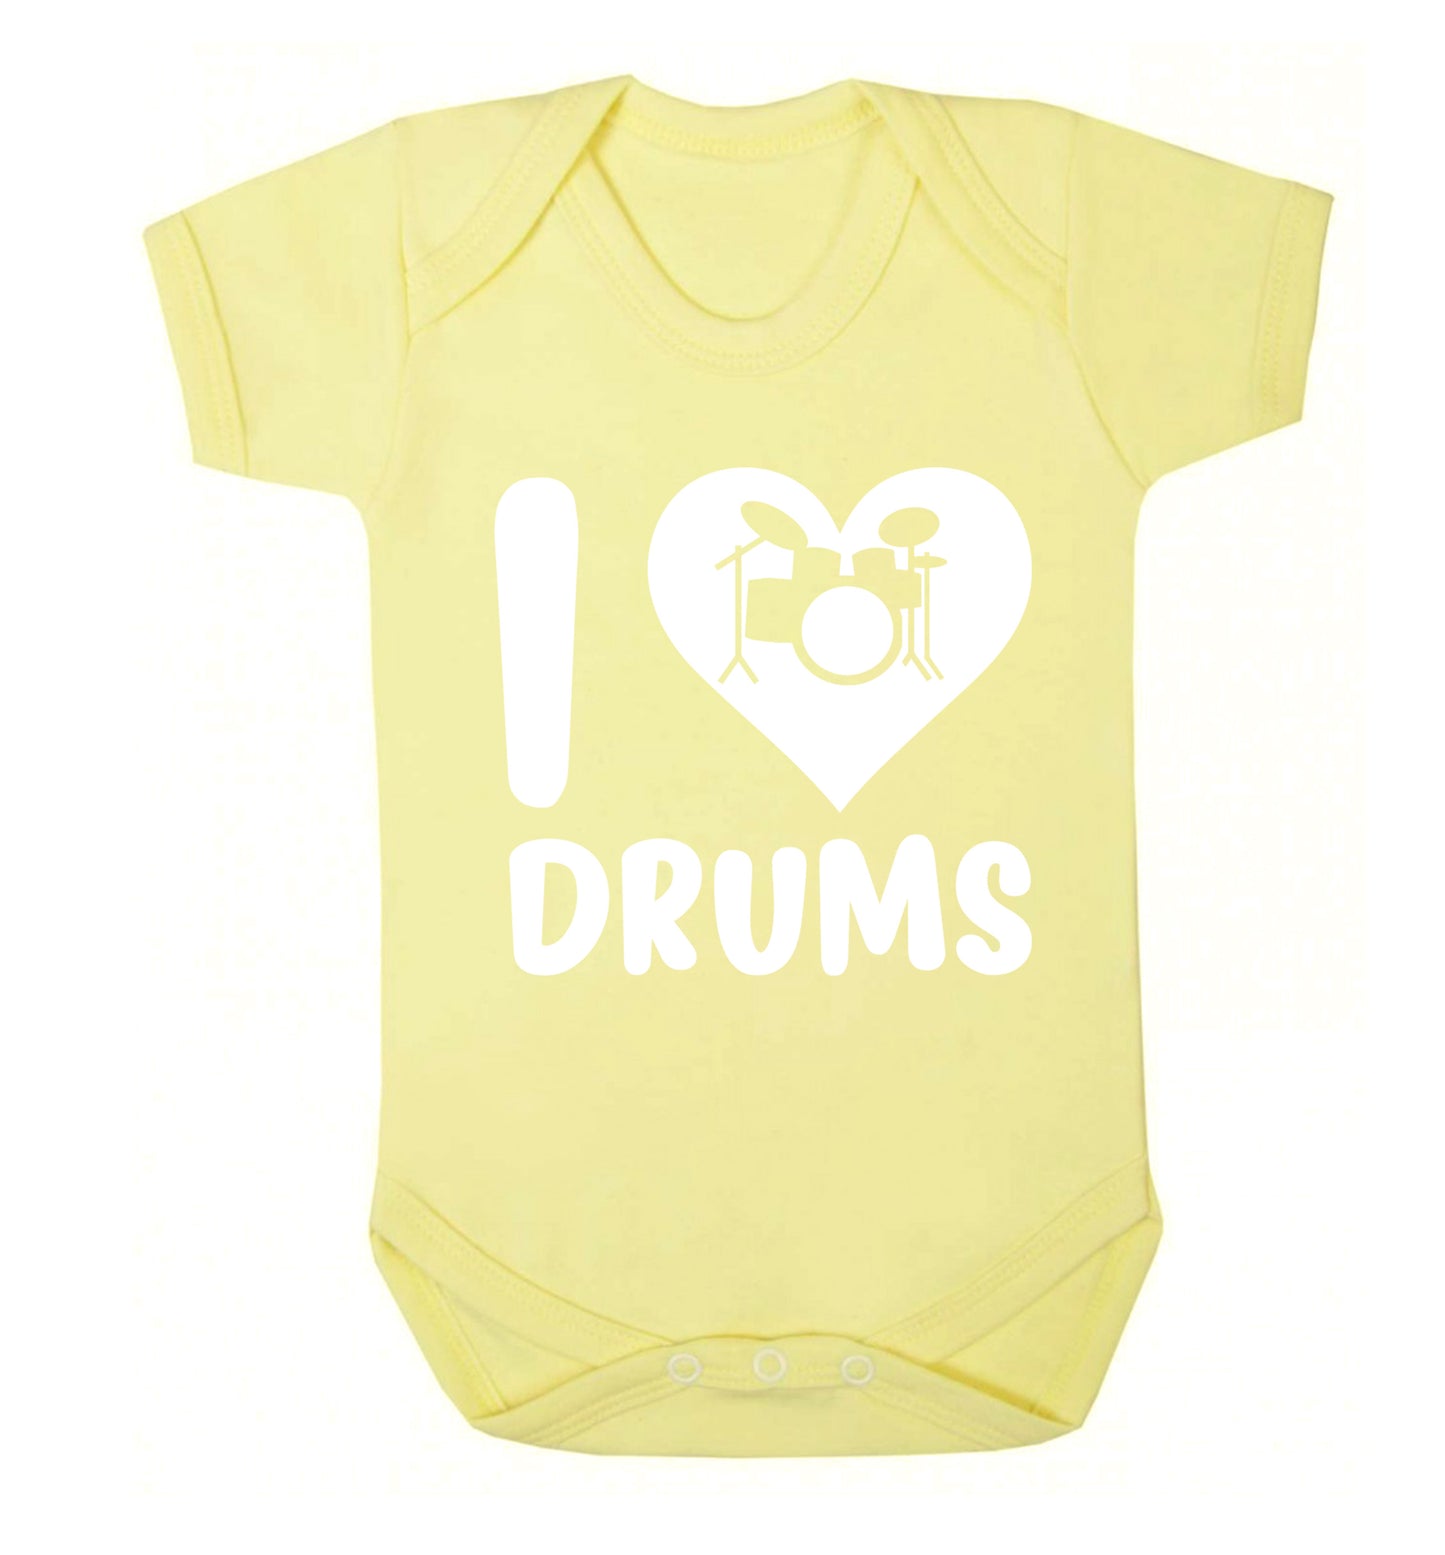 I love drums Baby Vest pale yellow 18-24 months